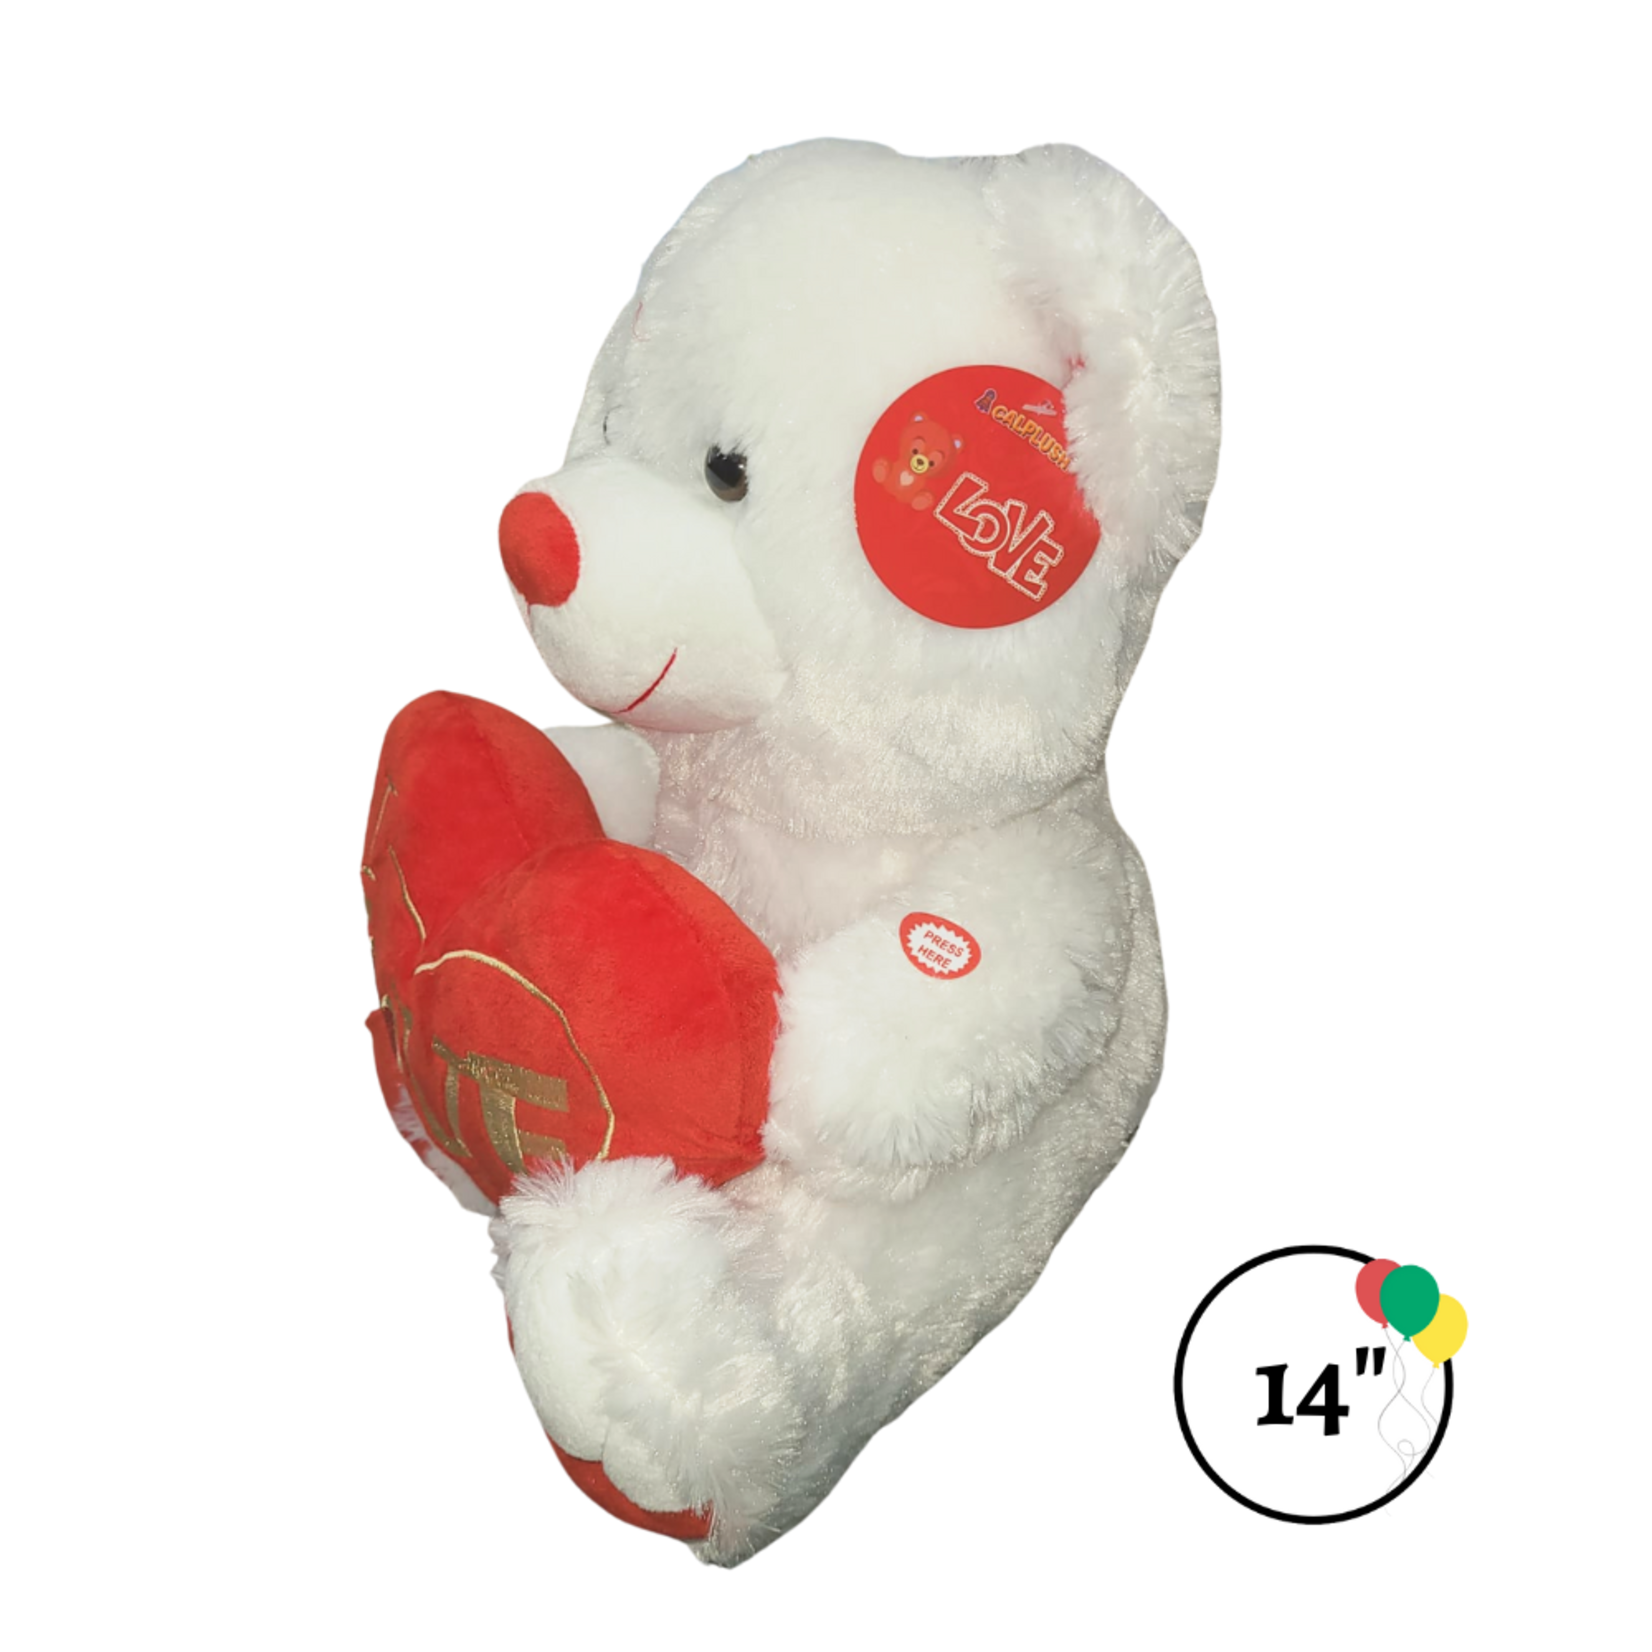 14" Musical Bear w Red and Gold Heart